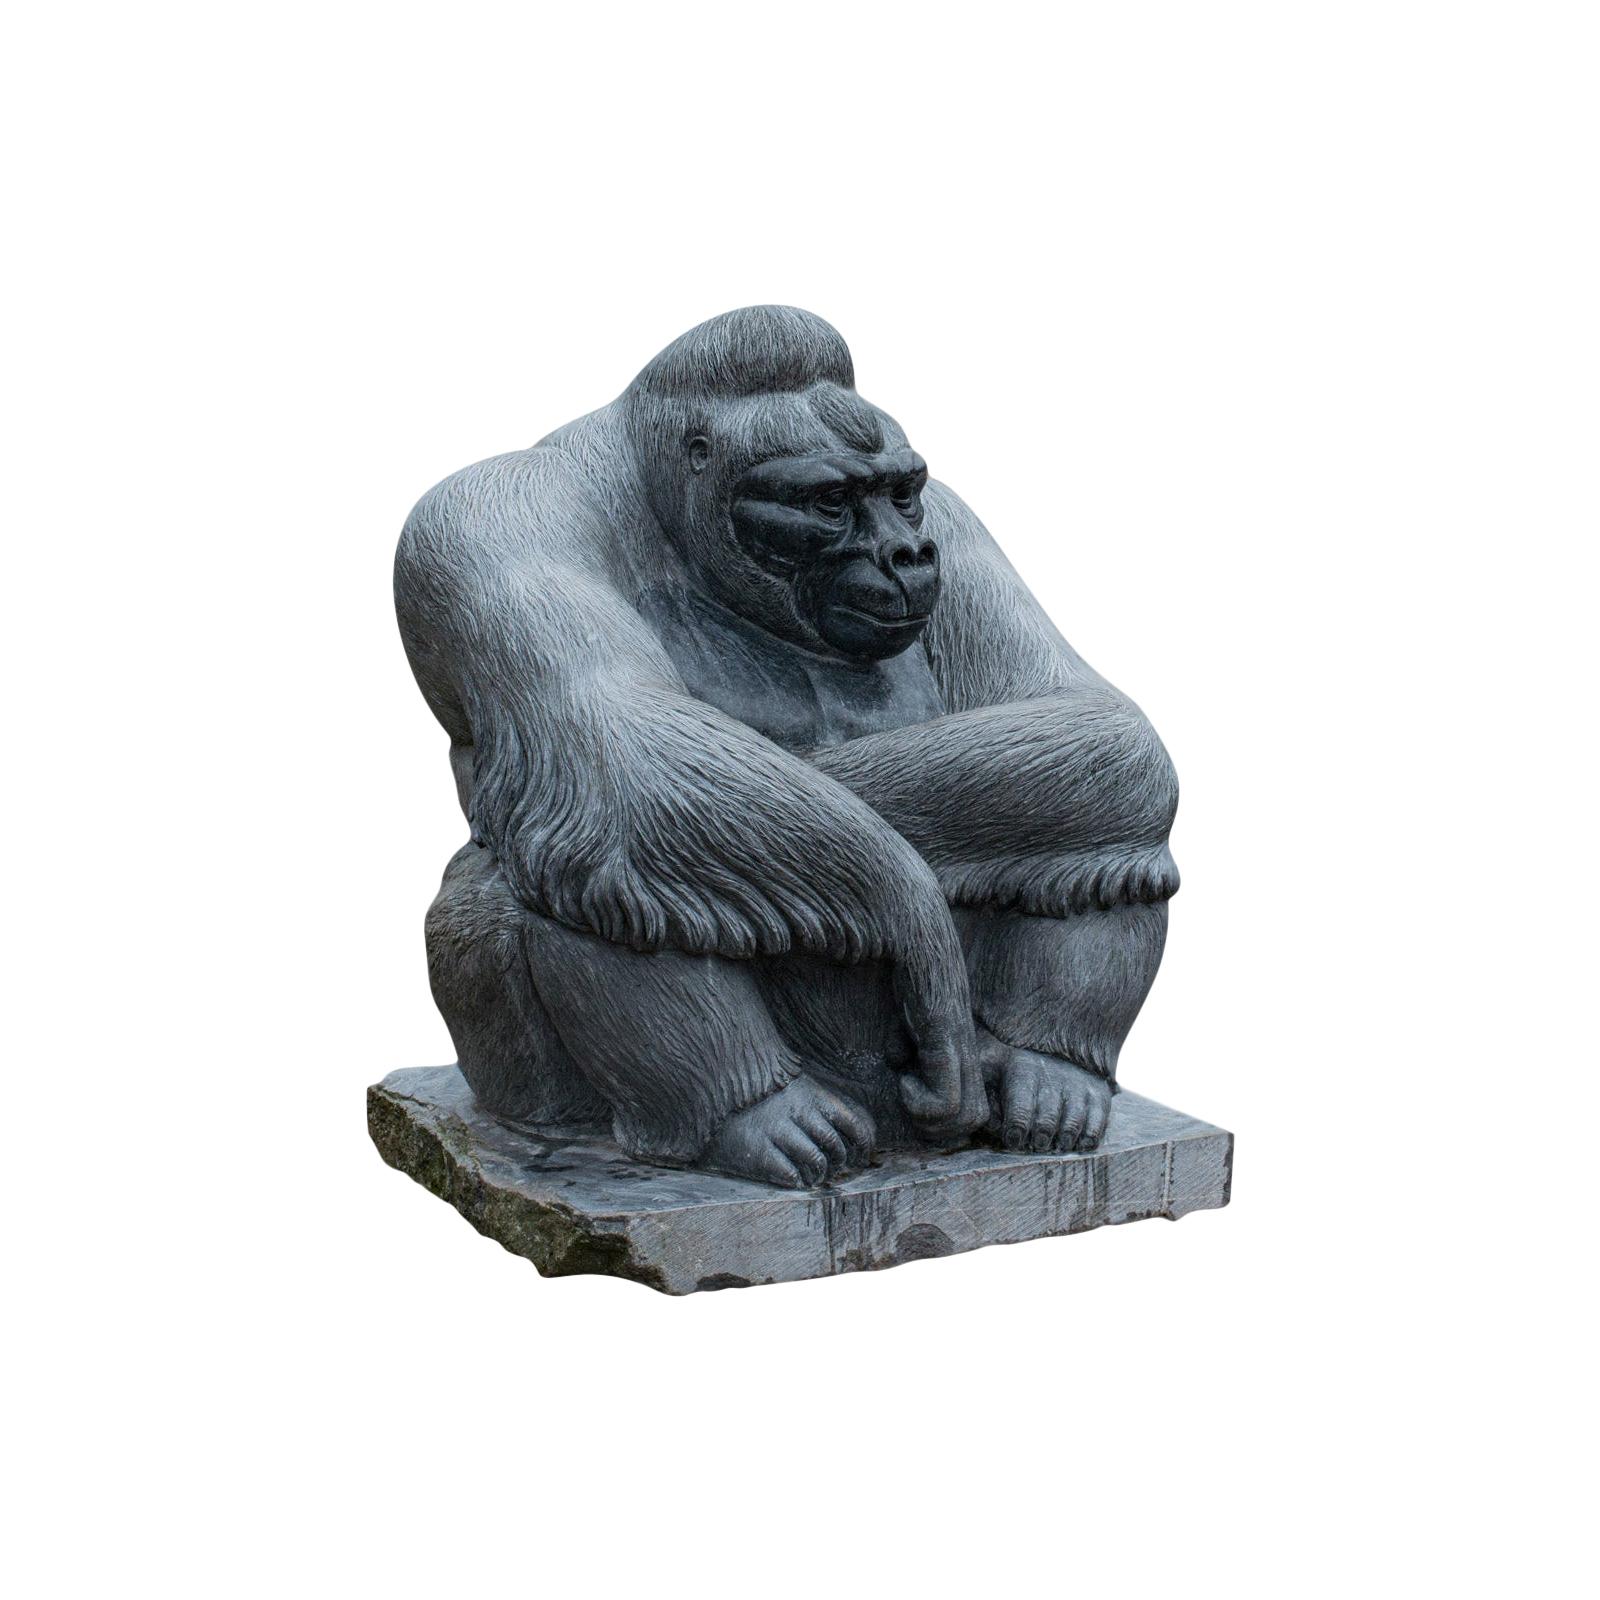 Large Sculptural Artwork Marble Statue Shabani Lowland Gorilla by Dominic  Hurley For Sale at 1stDibs